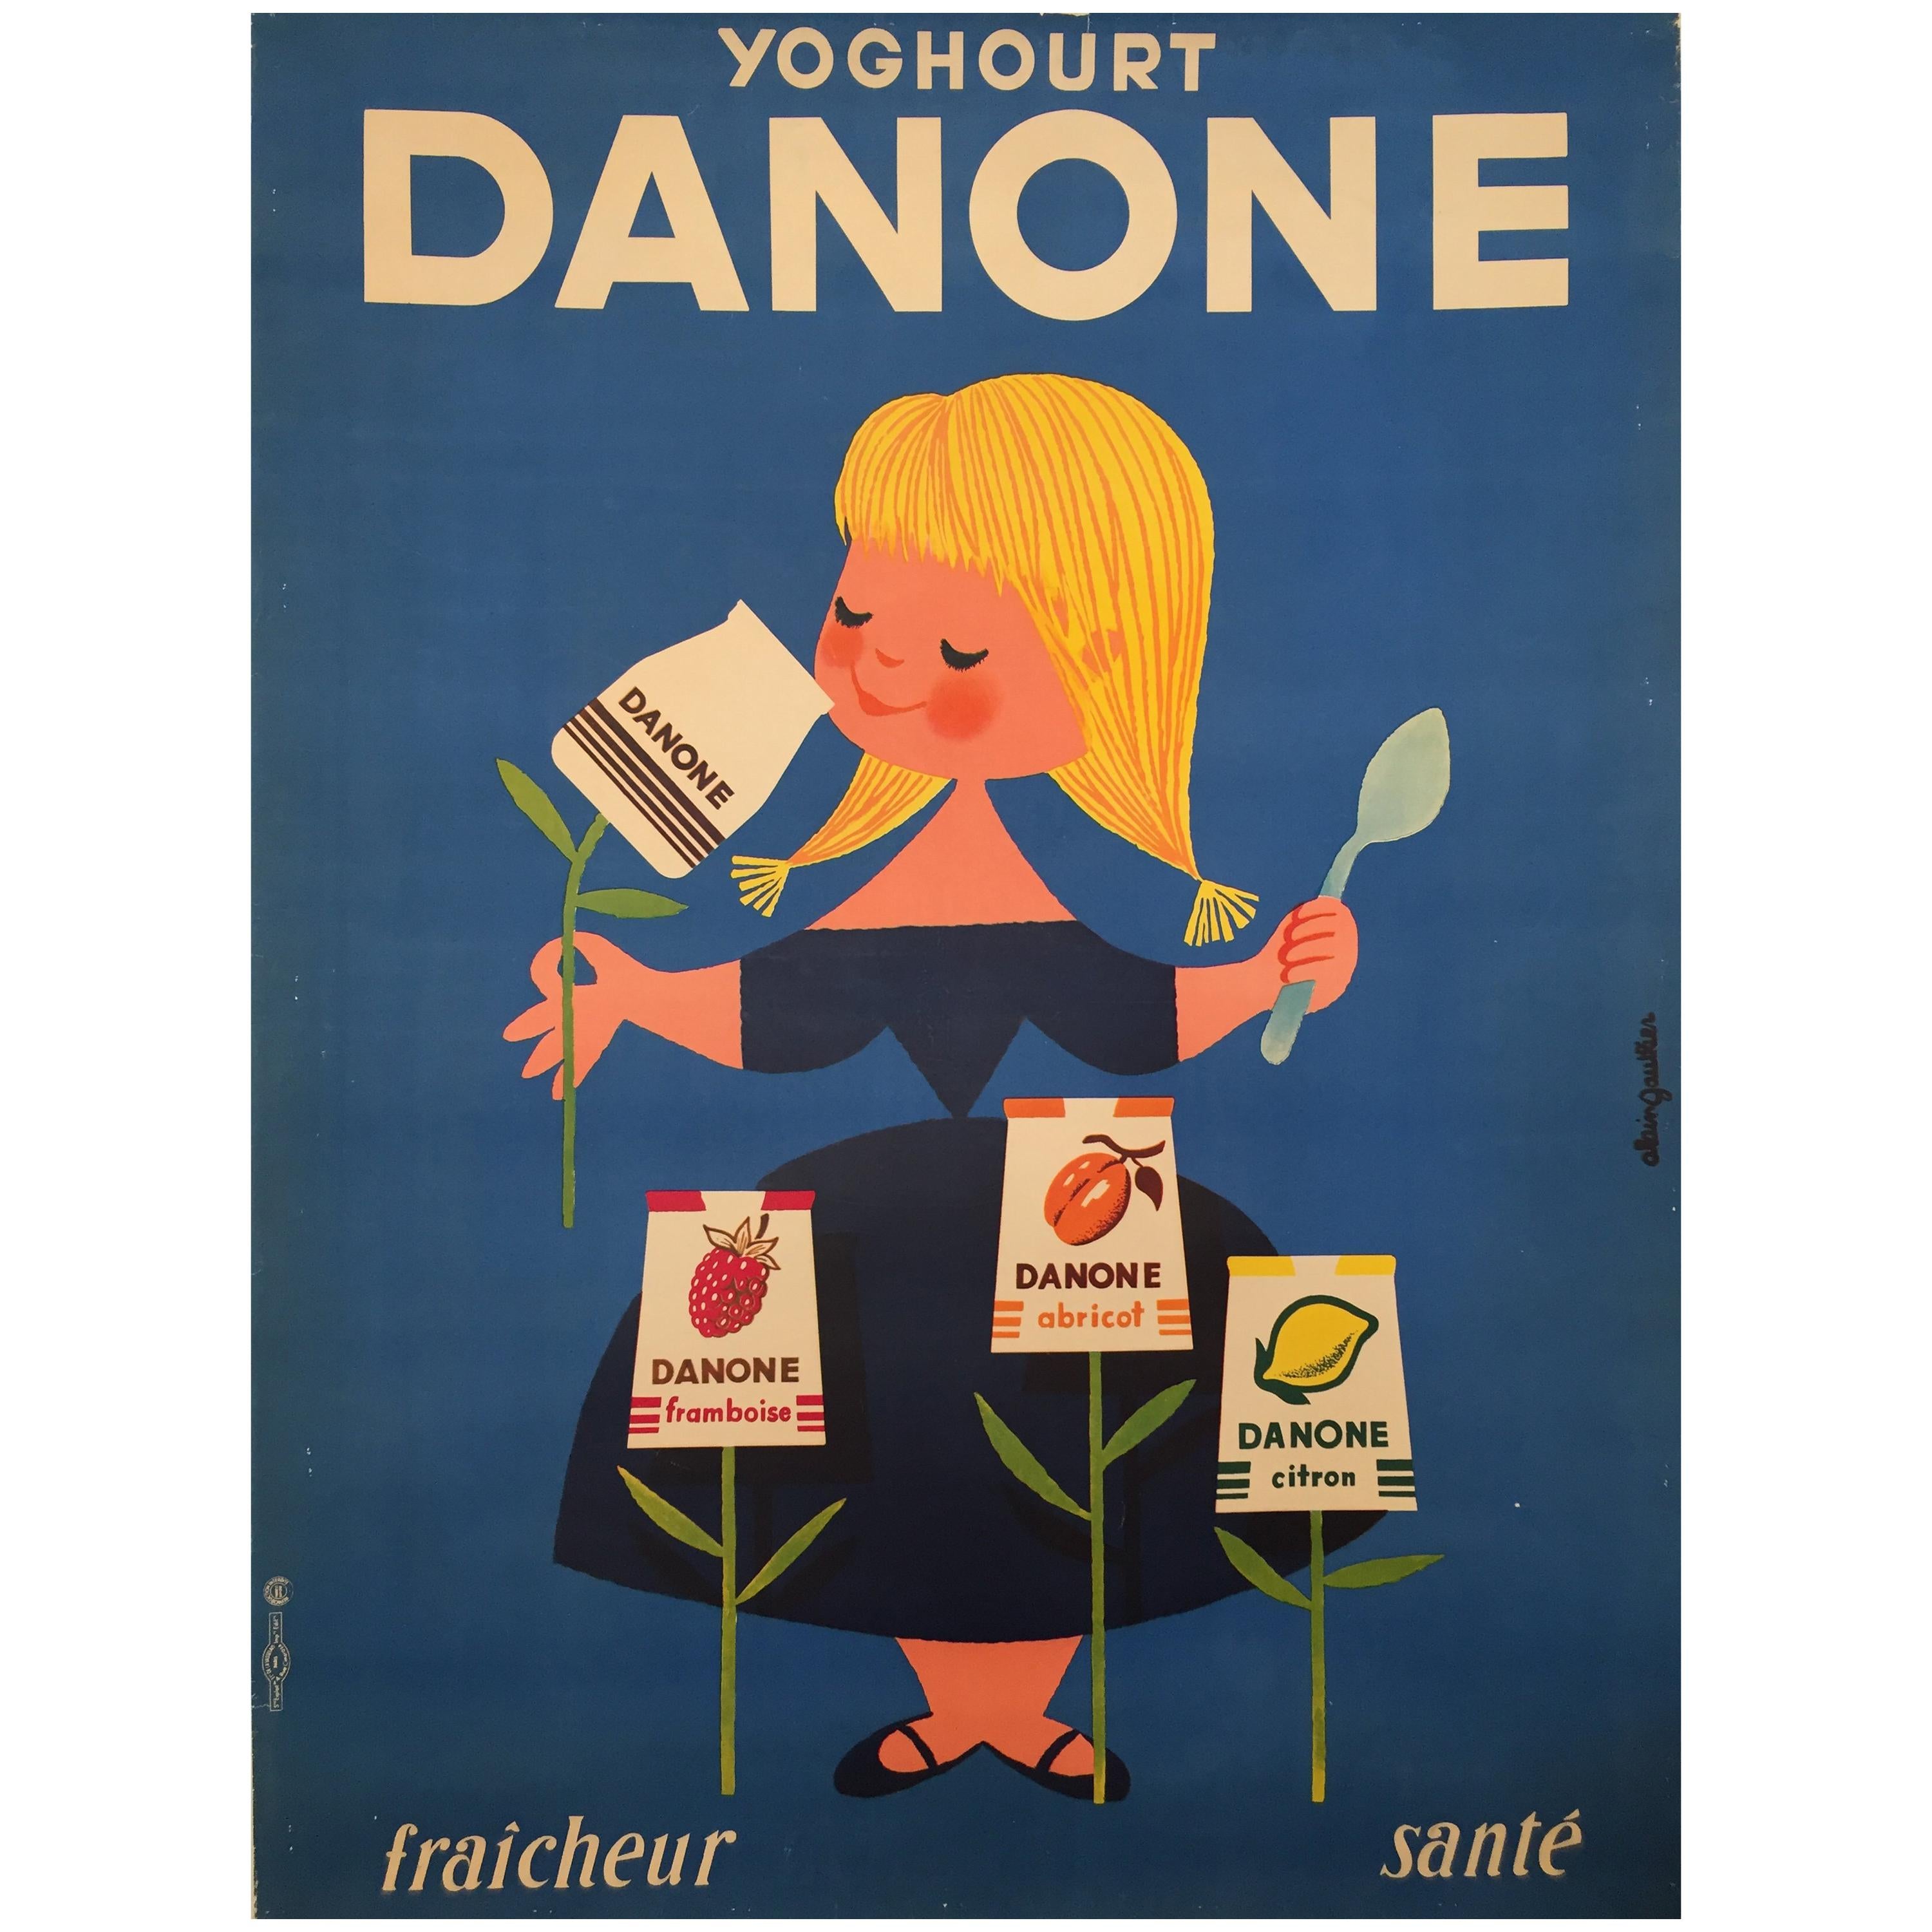 Original Vintage 1950s Advertising Poster for Dairy Product, 'Danone'